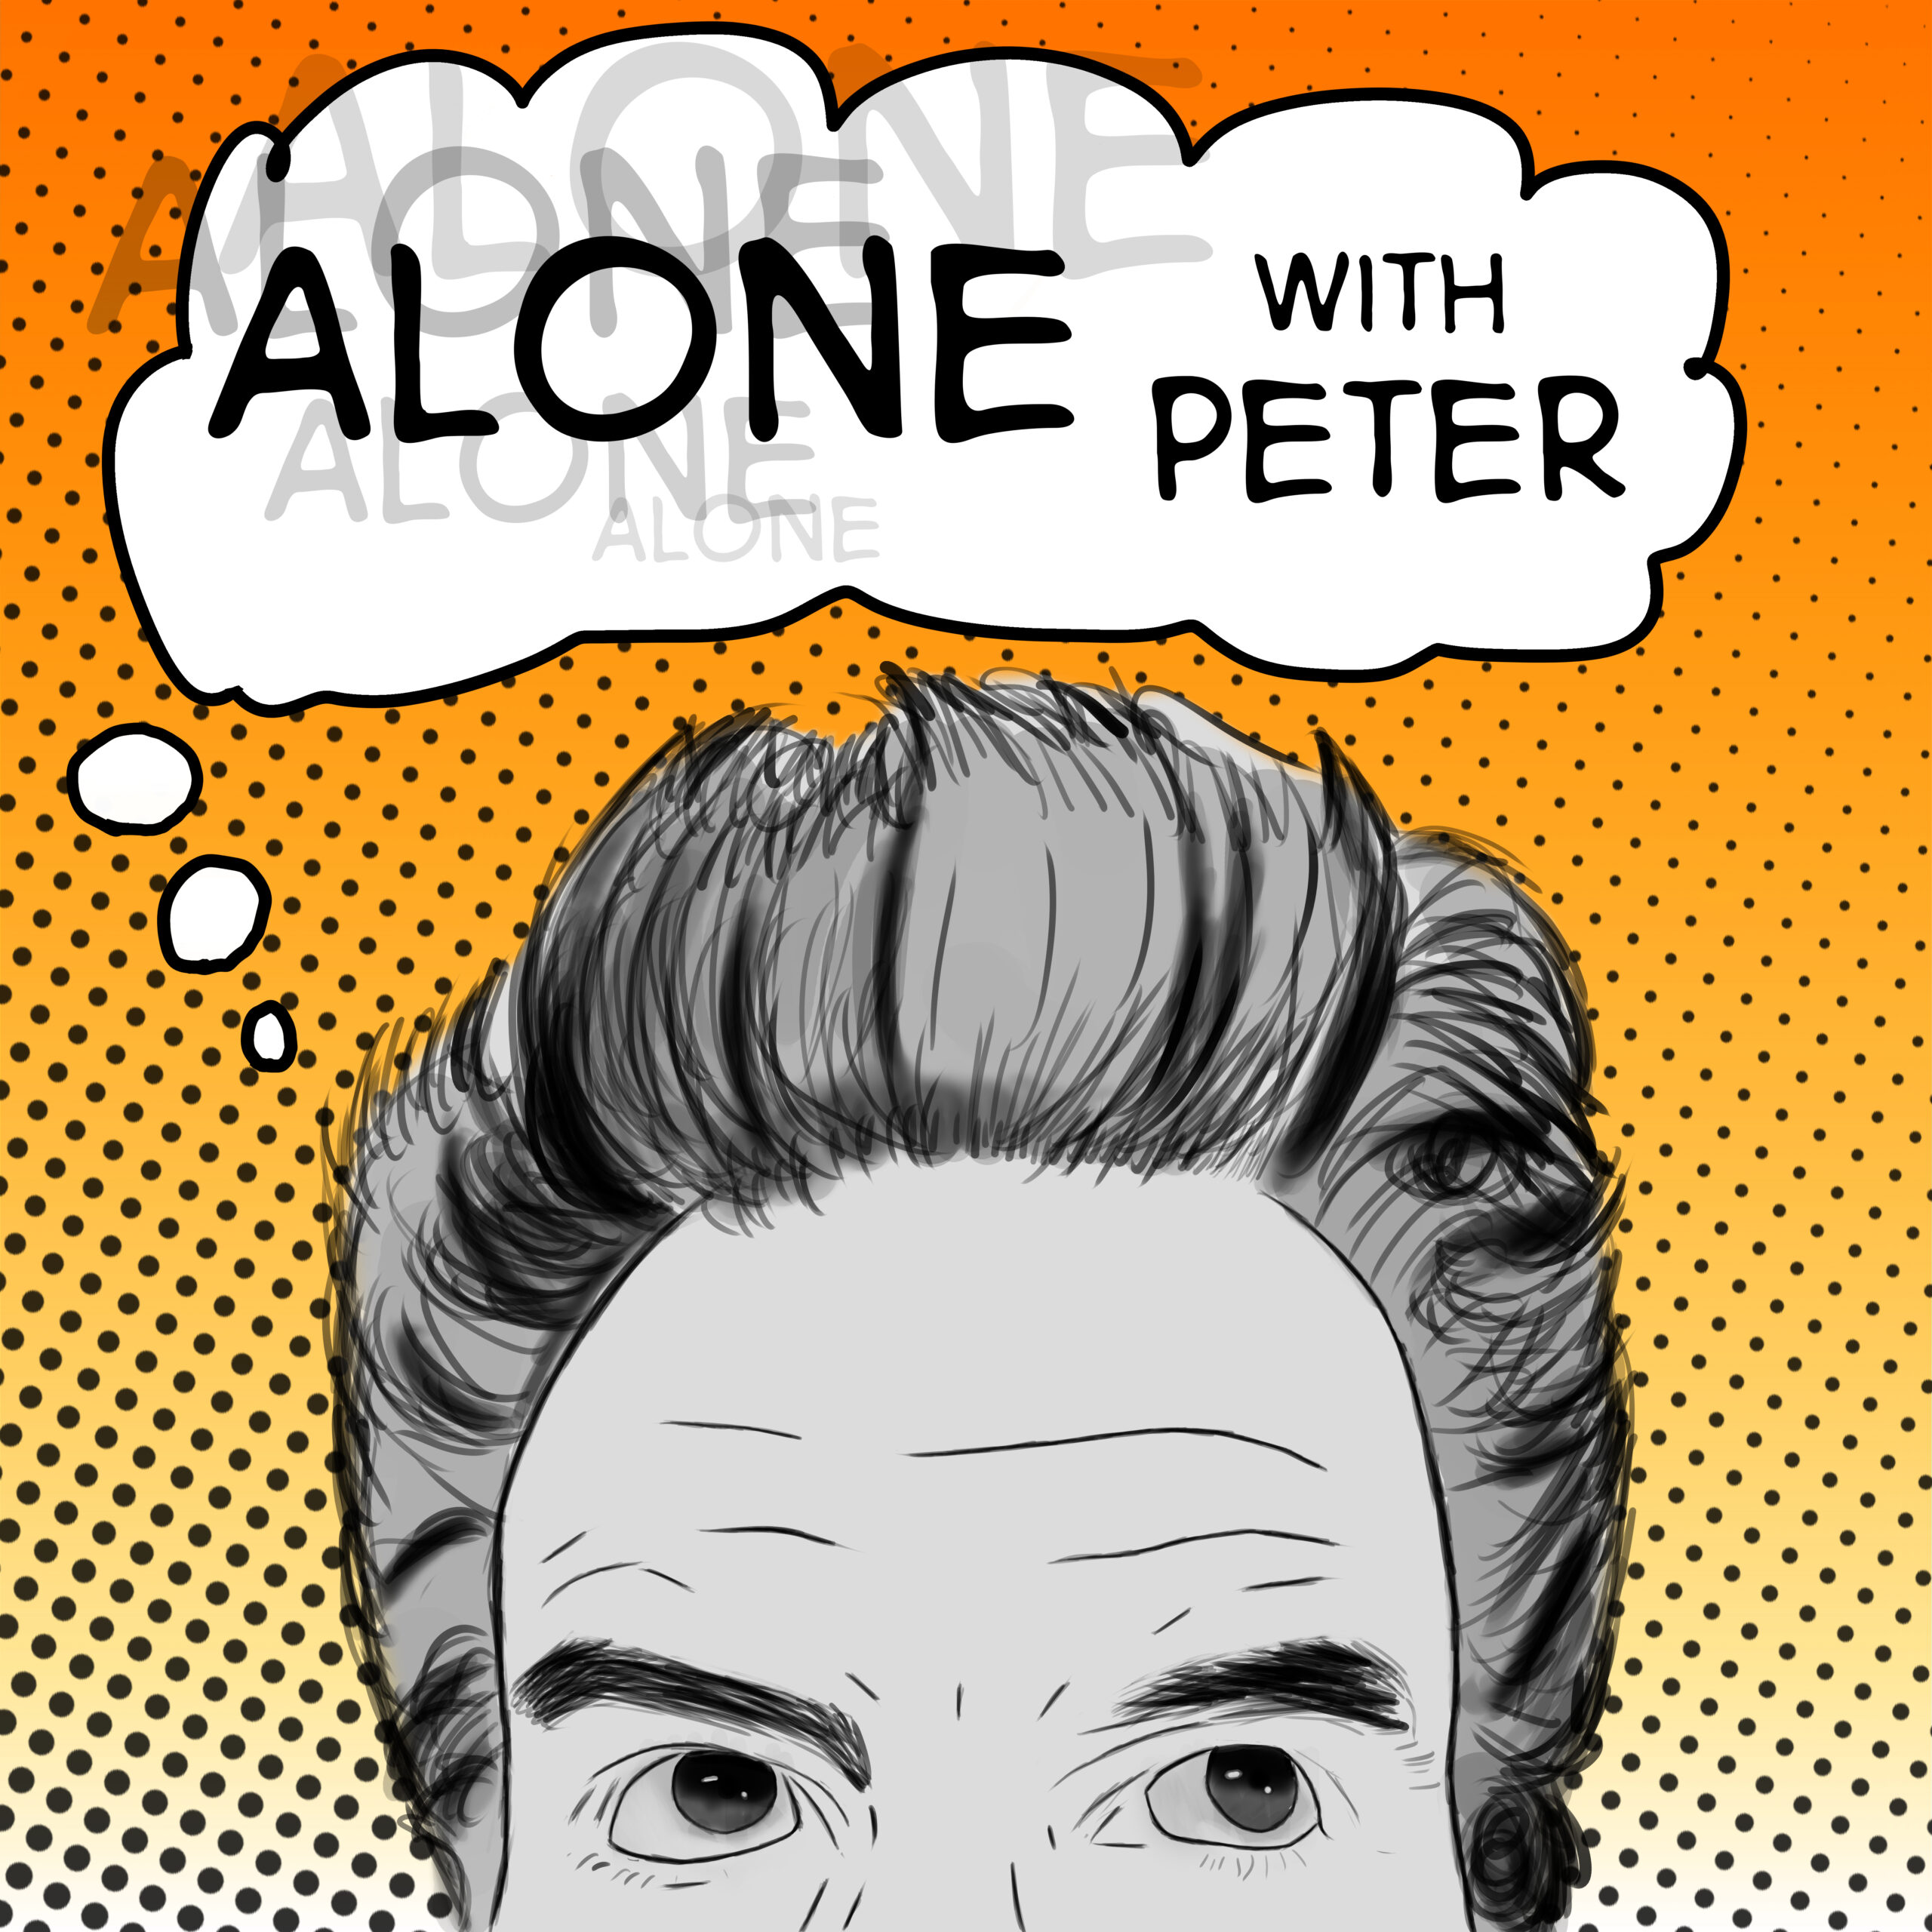 Alone with Peter Season 2 Trailer